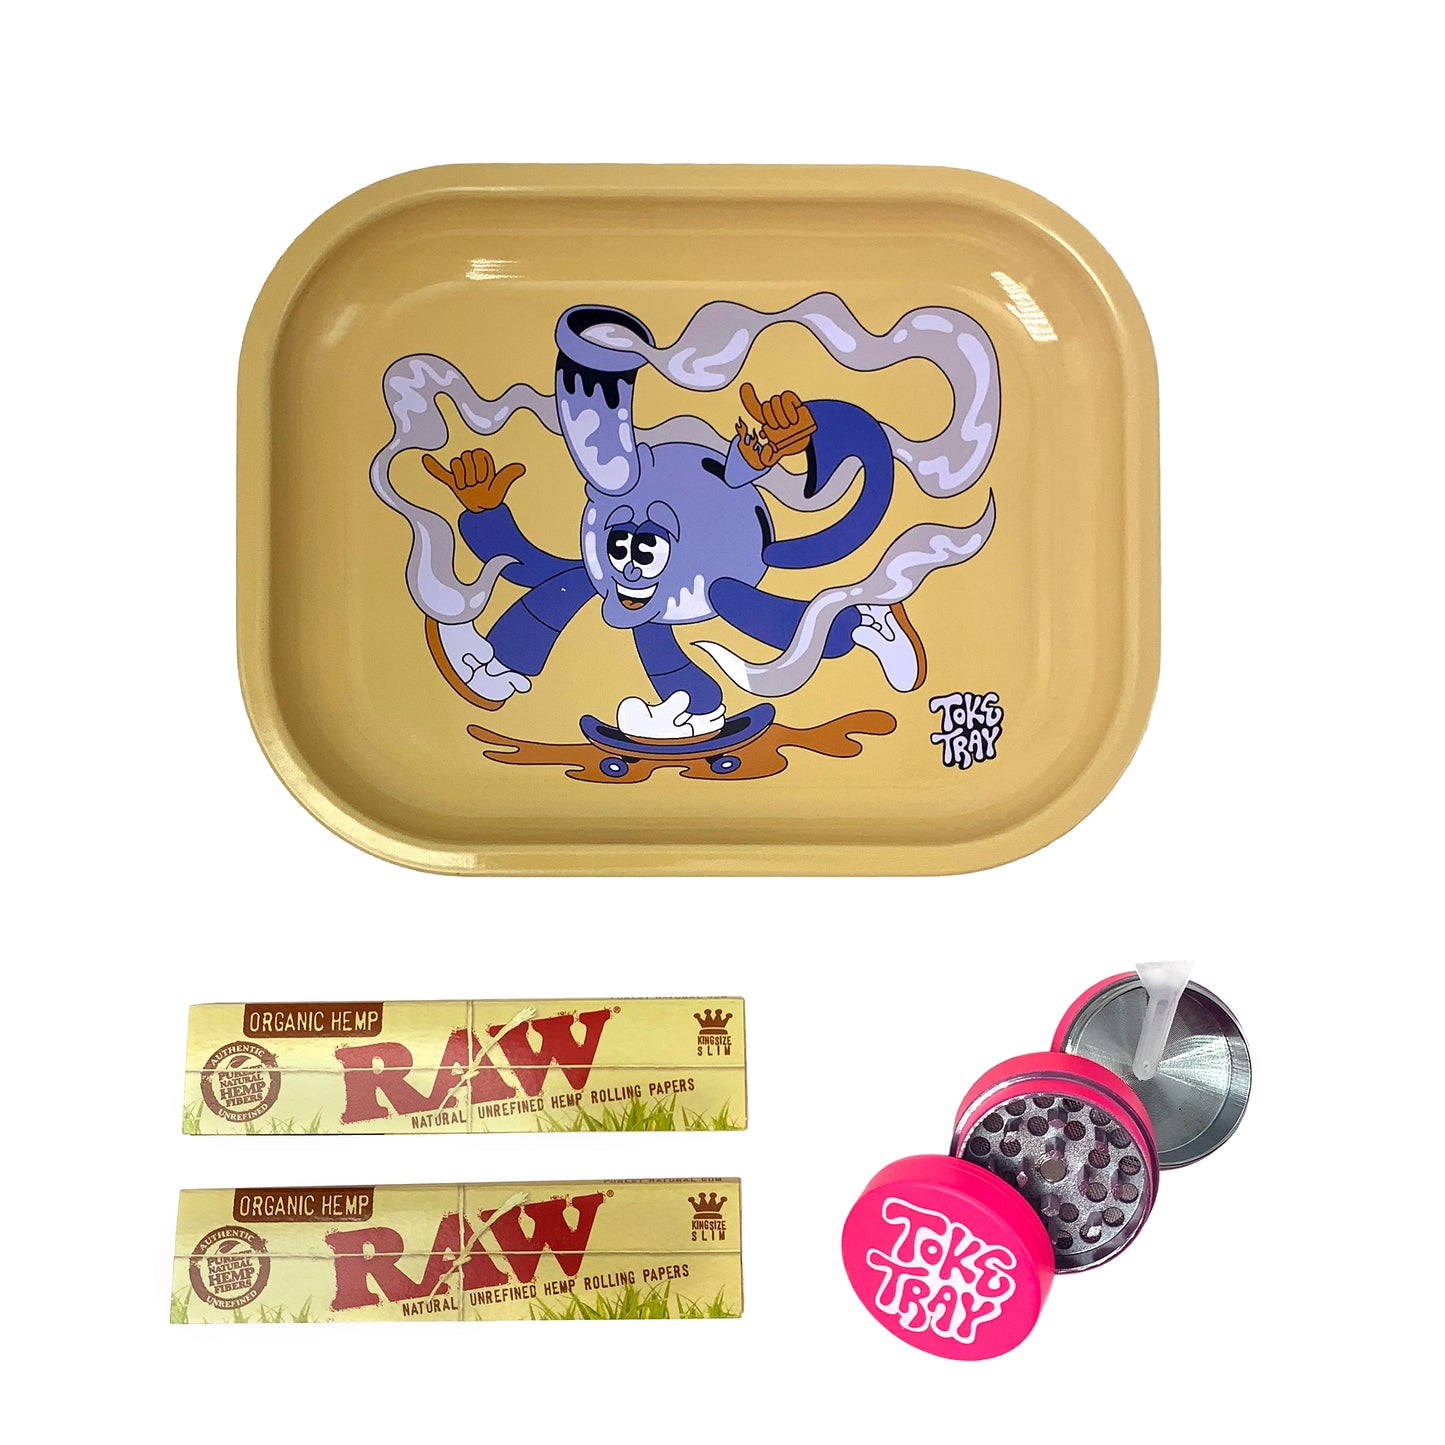 Skateboard Smoke Rolling Tray Set | With Pink Grinder and Raw Rolling Papers